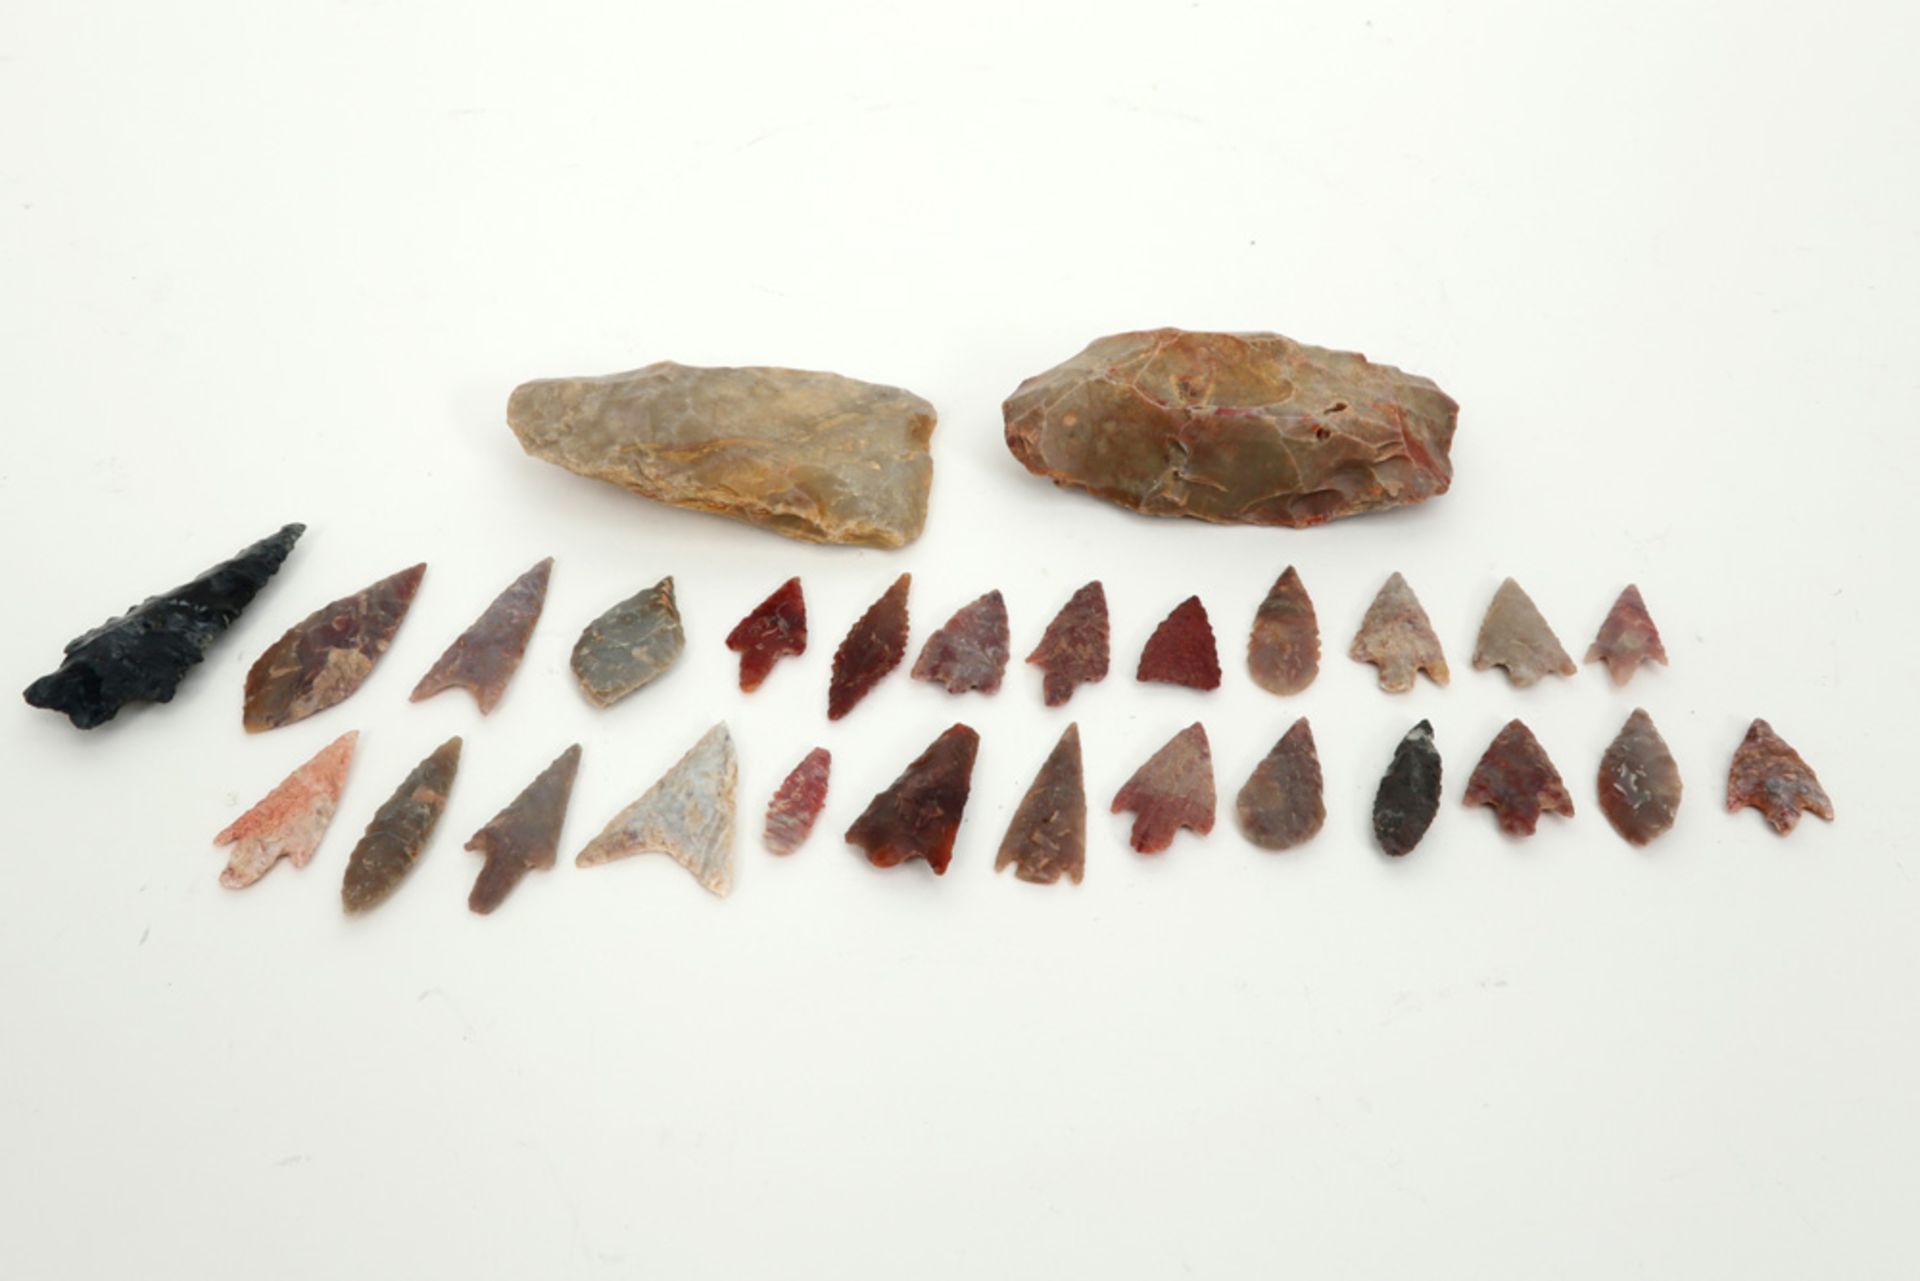 28 Prehistorical stone implements : 2 axes, 25 arrows and a spear point